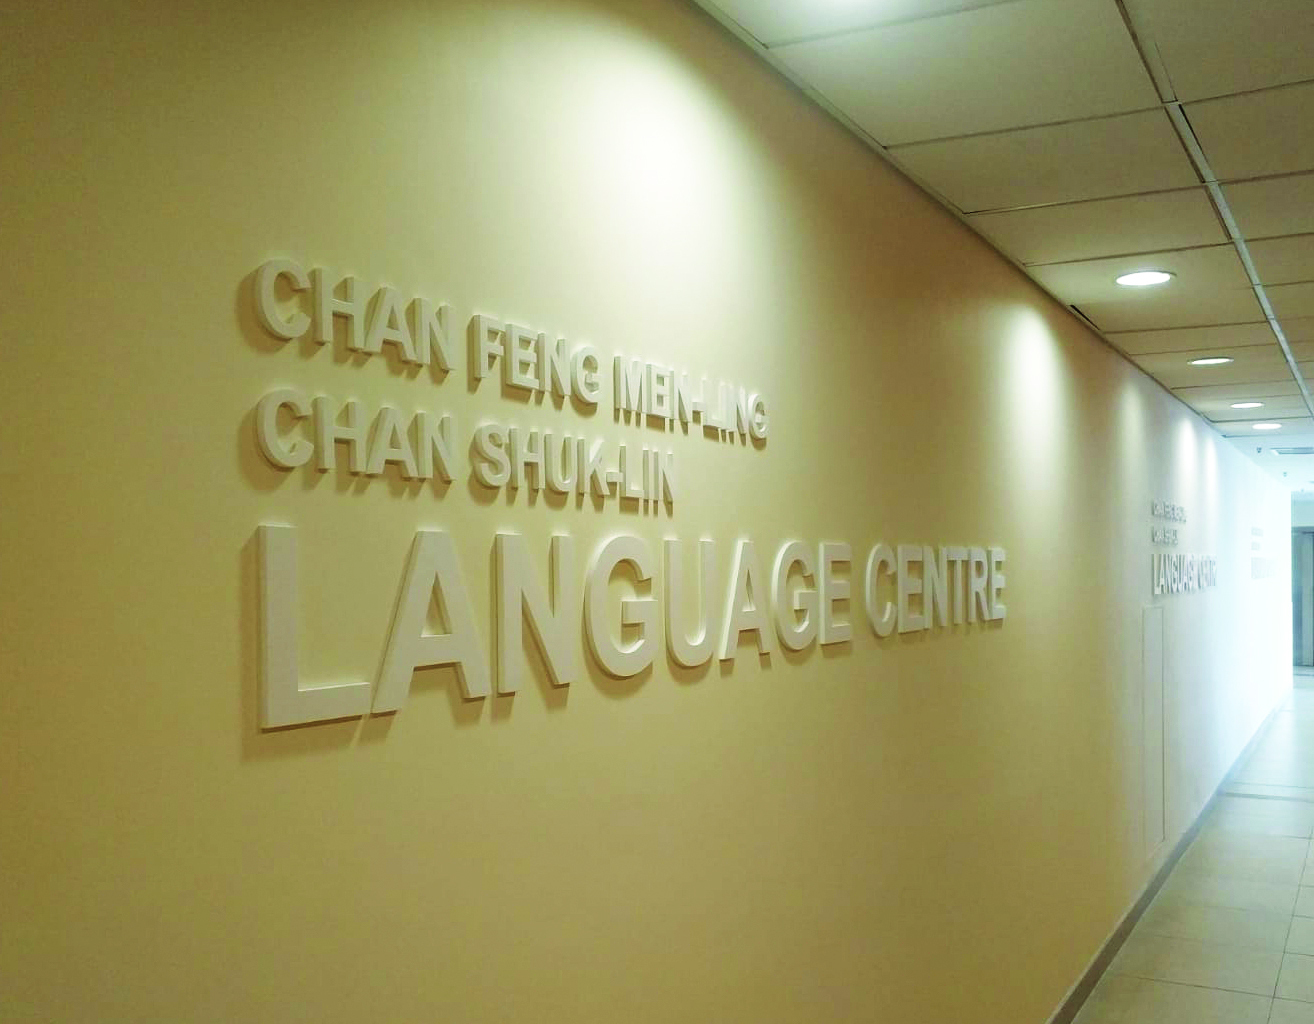 The Language Centre integrates the language training courses and activities across the University.